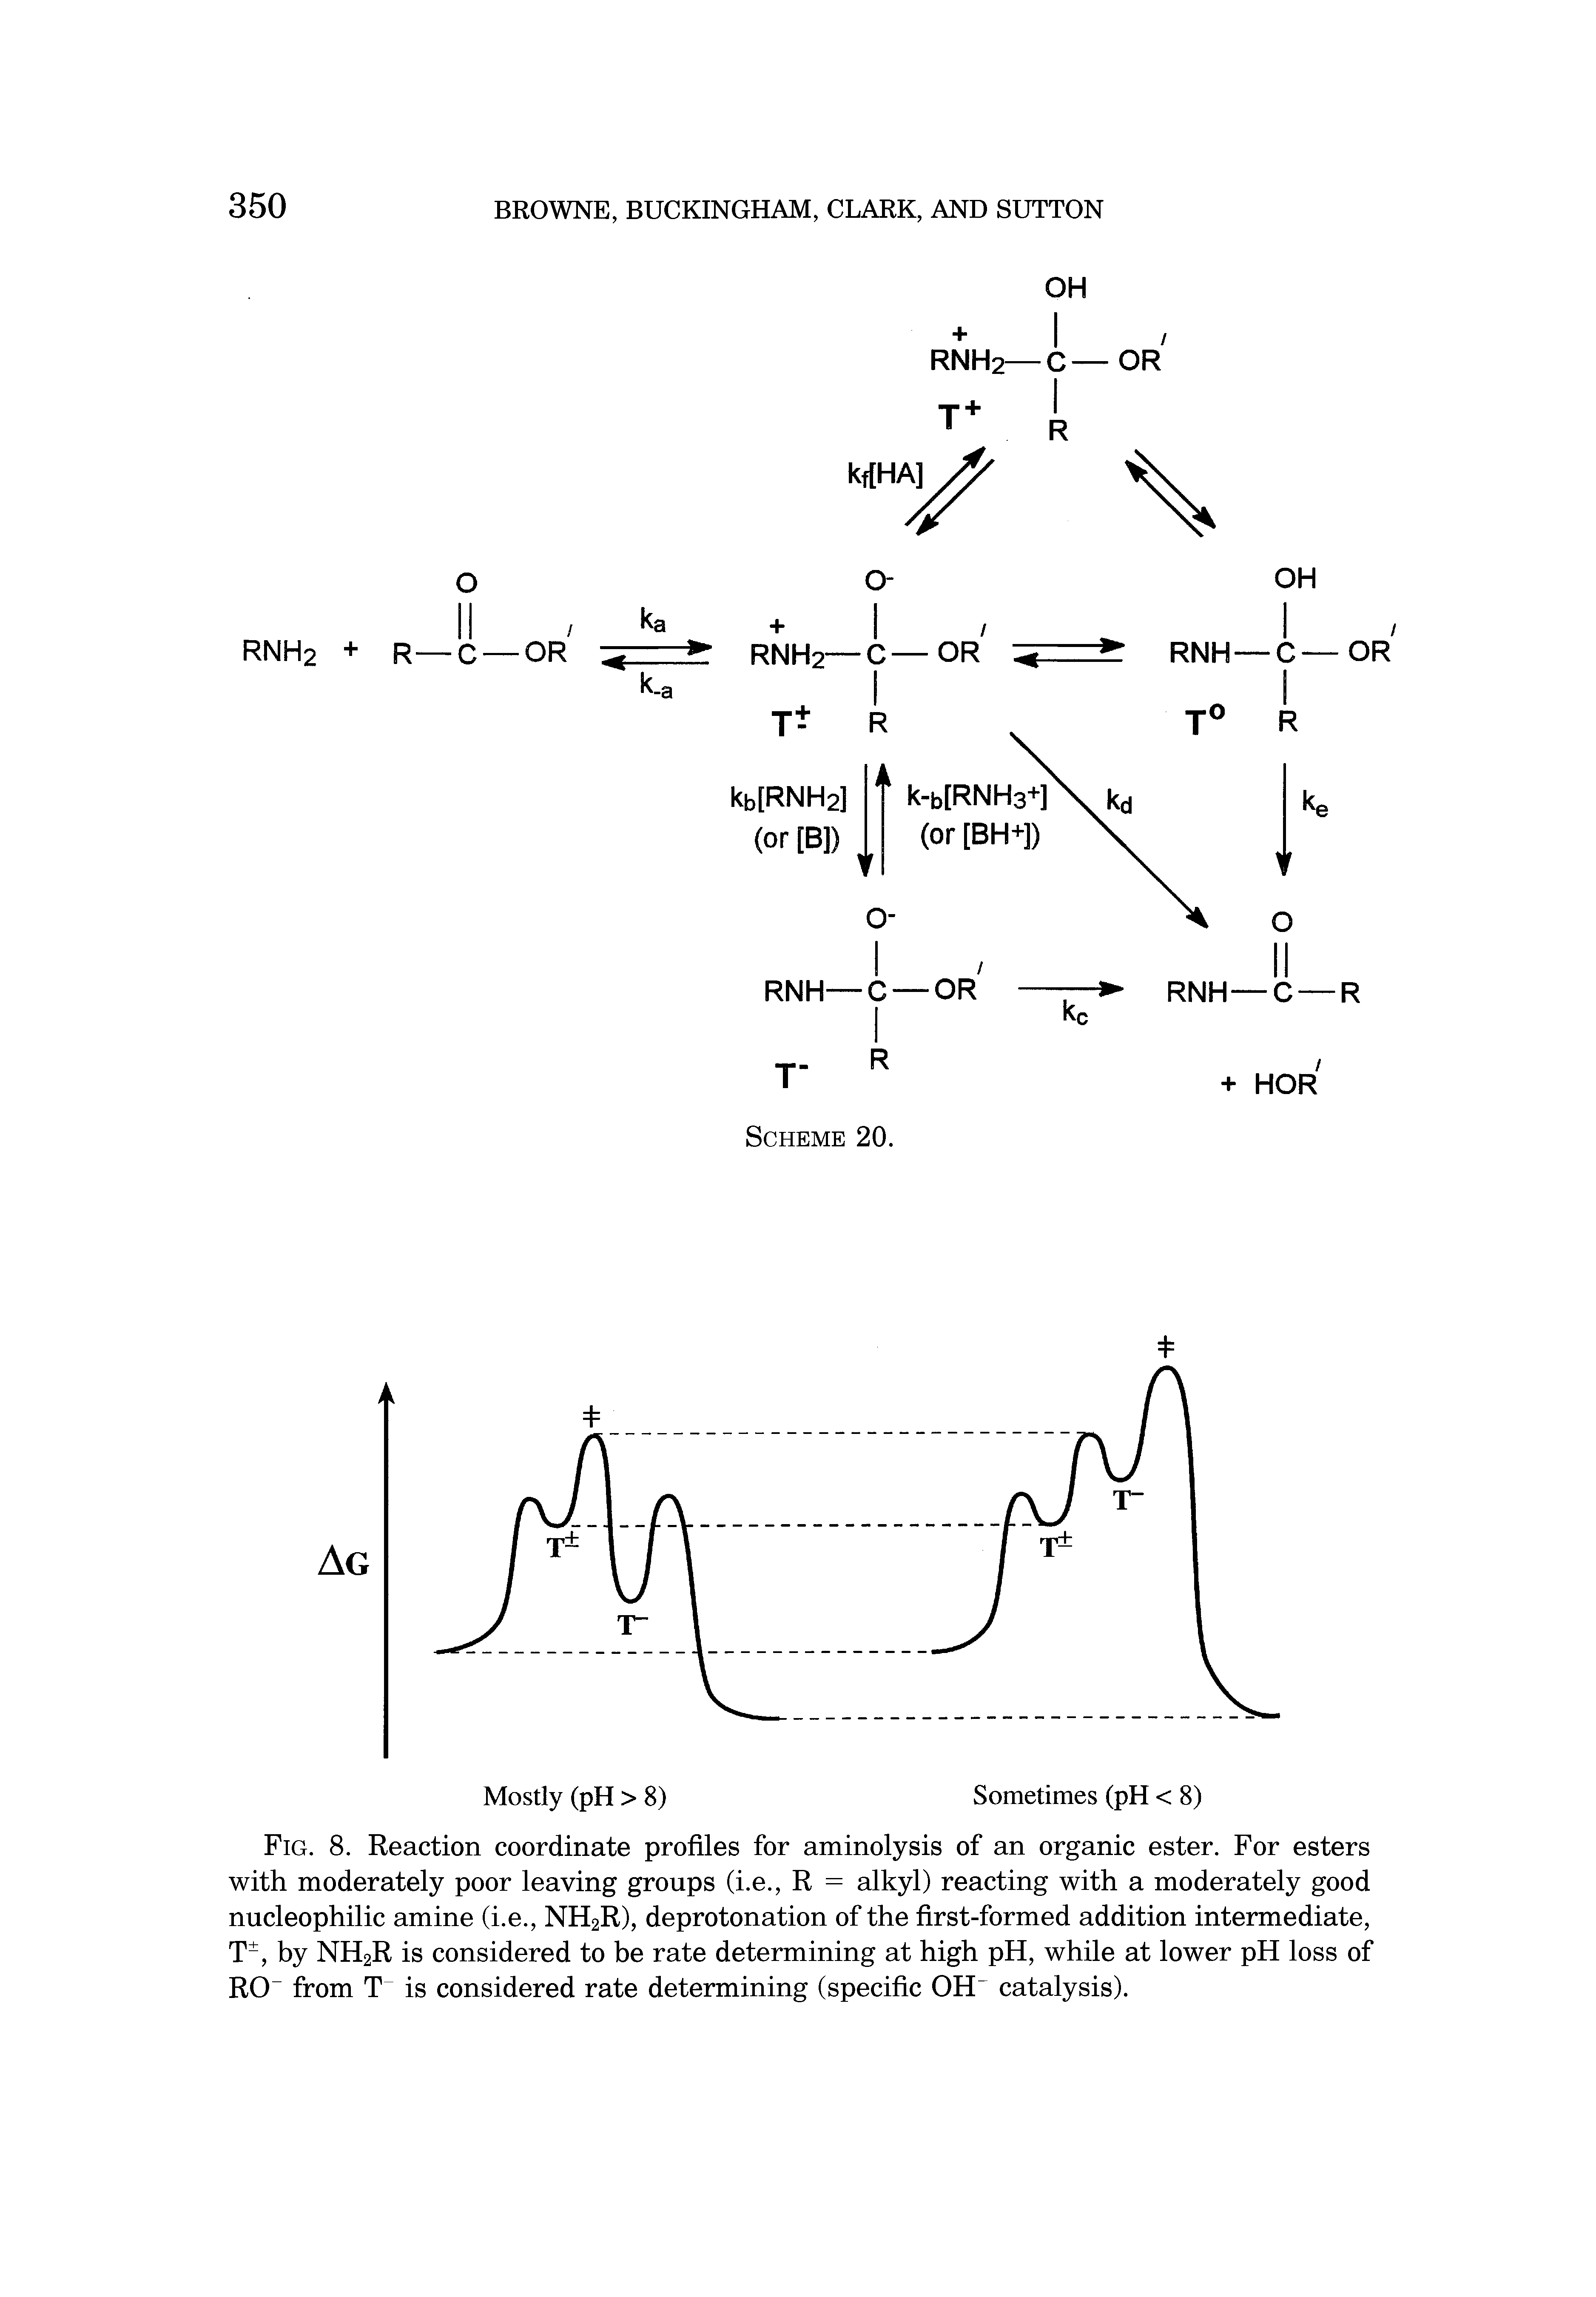 Fig. 8. Reaction coordinate profiles for aminolysis of an organic ester. For esters with moderately poor leaving groups (i.e., R = alkyl) reacting with a moderately good nucleophilic amine (i.e., NH2R), deprotonation of the first-formed addition intermediate, T , by NH2R is considered to be rate determining at high pH, while at lower pH loss of RO from T is considered rate determining (specific OH catalysis).